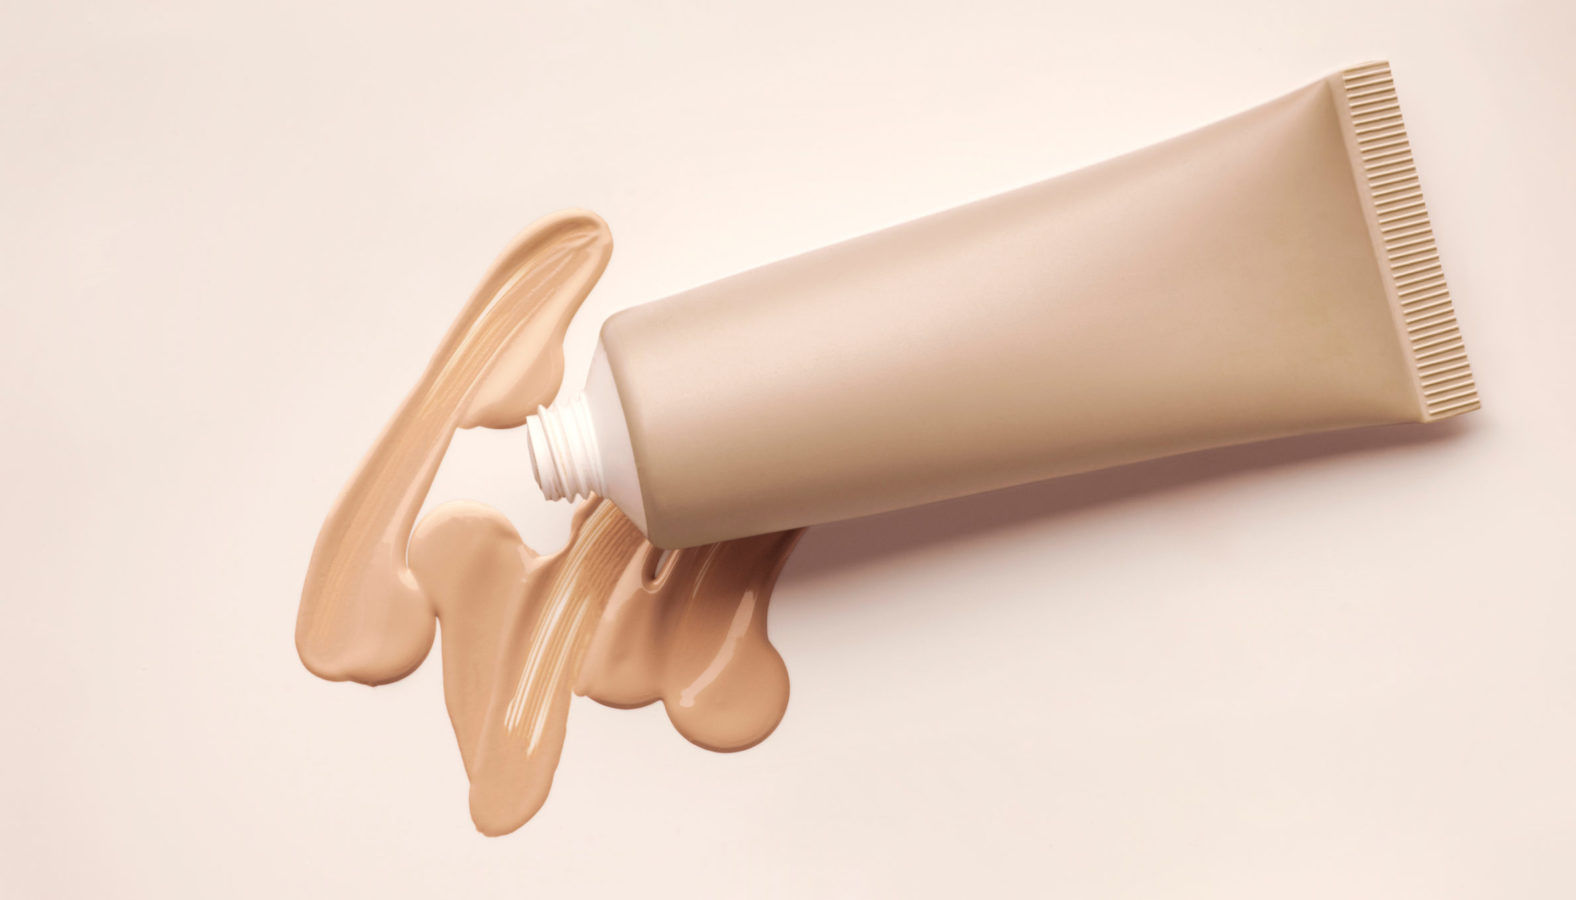 No filter needed: Try these CC creams for a natural summer makeup look